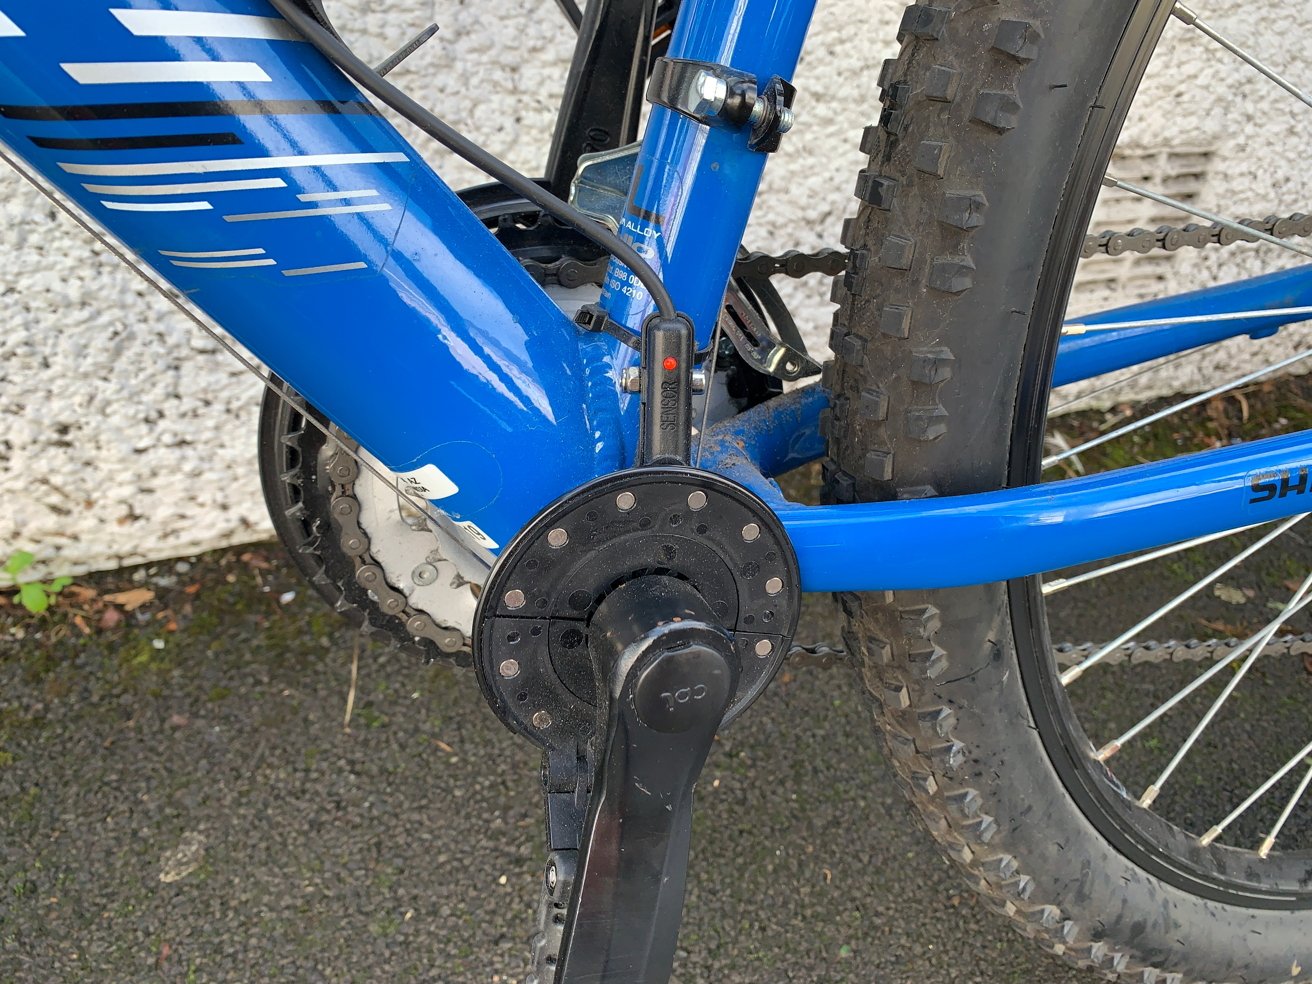 Magnetic disks are attached to the pedal, which activates the motor.